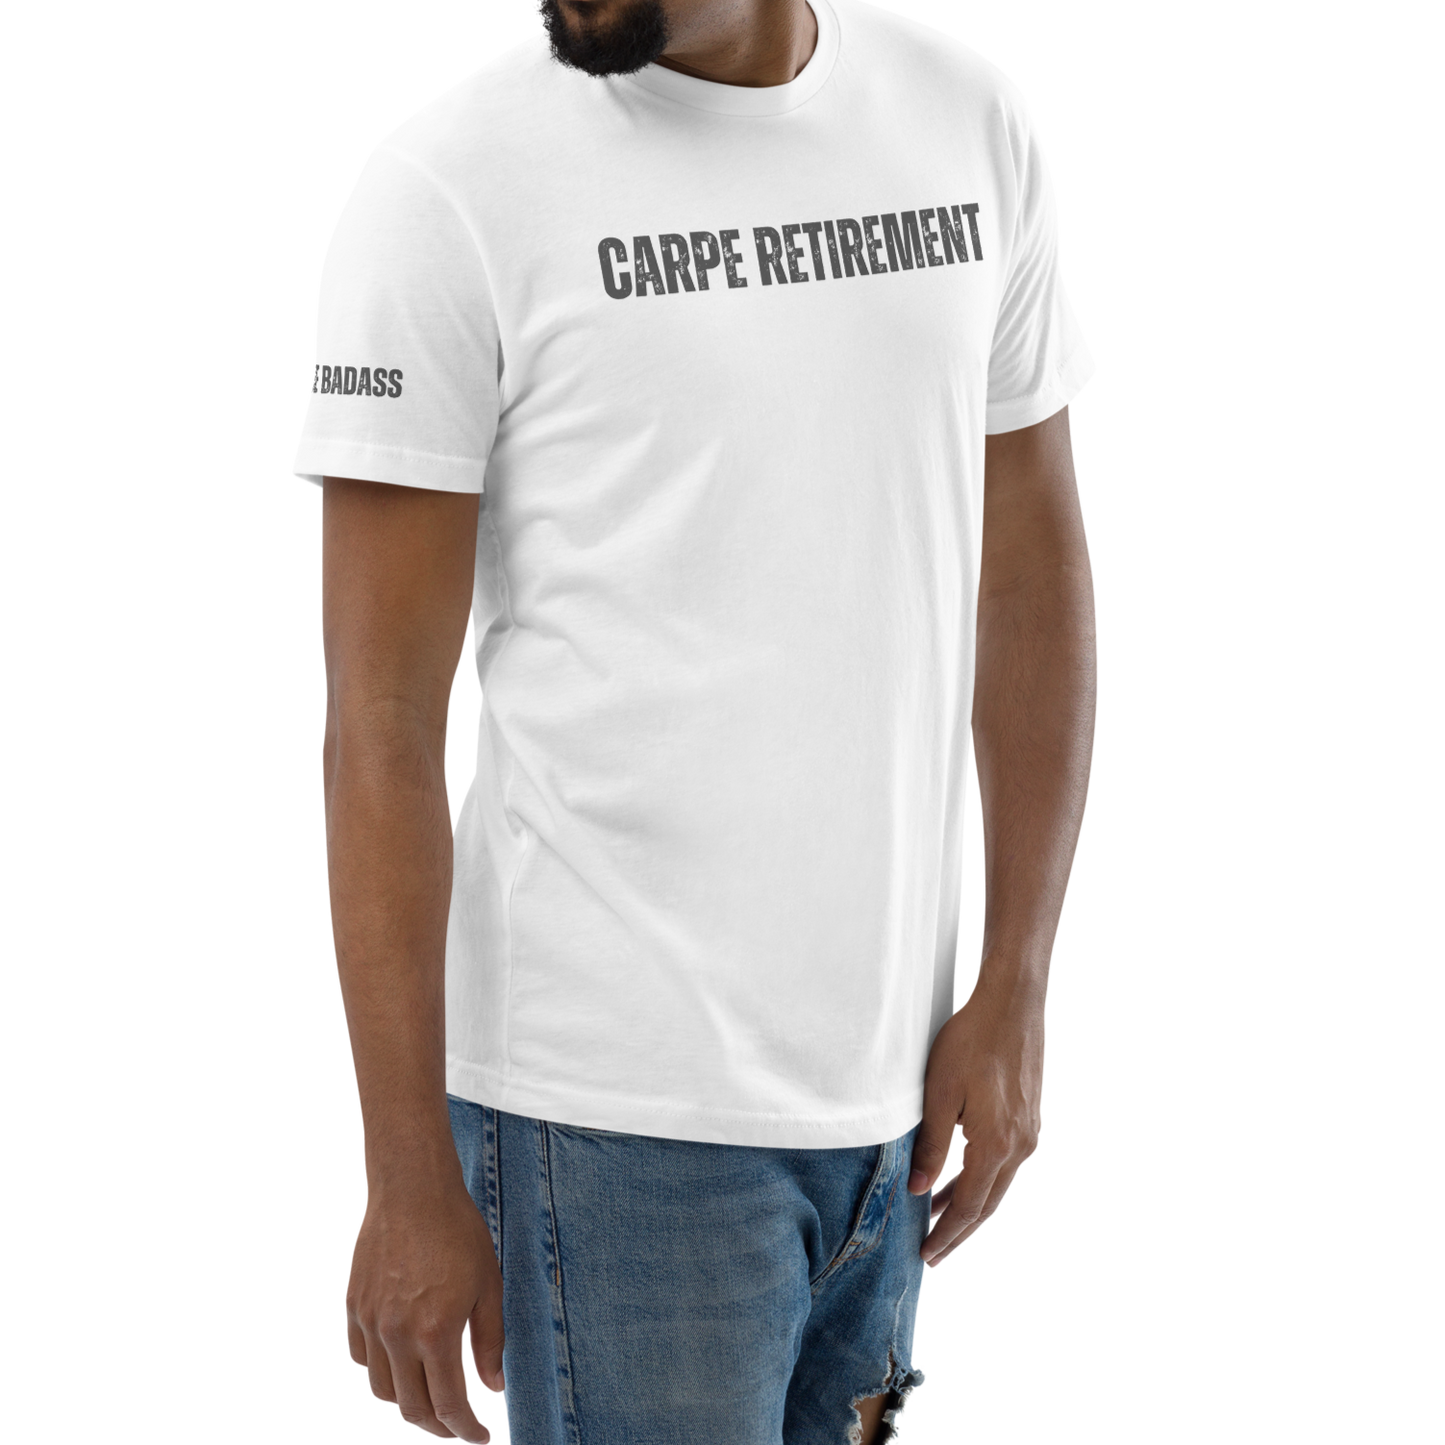 Carpe Retirement Fitted Shirt | Version 2